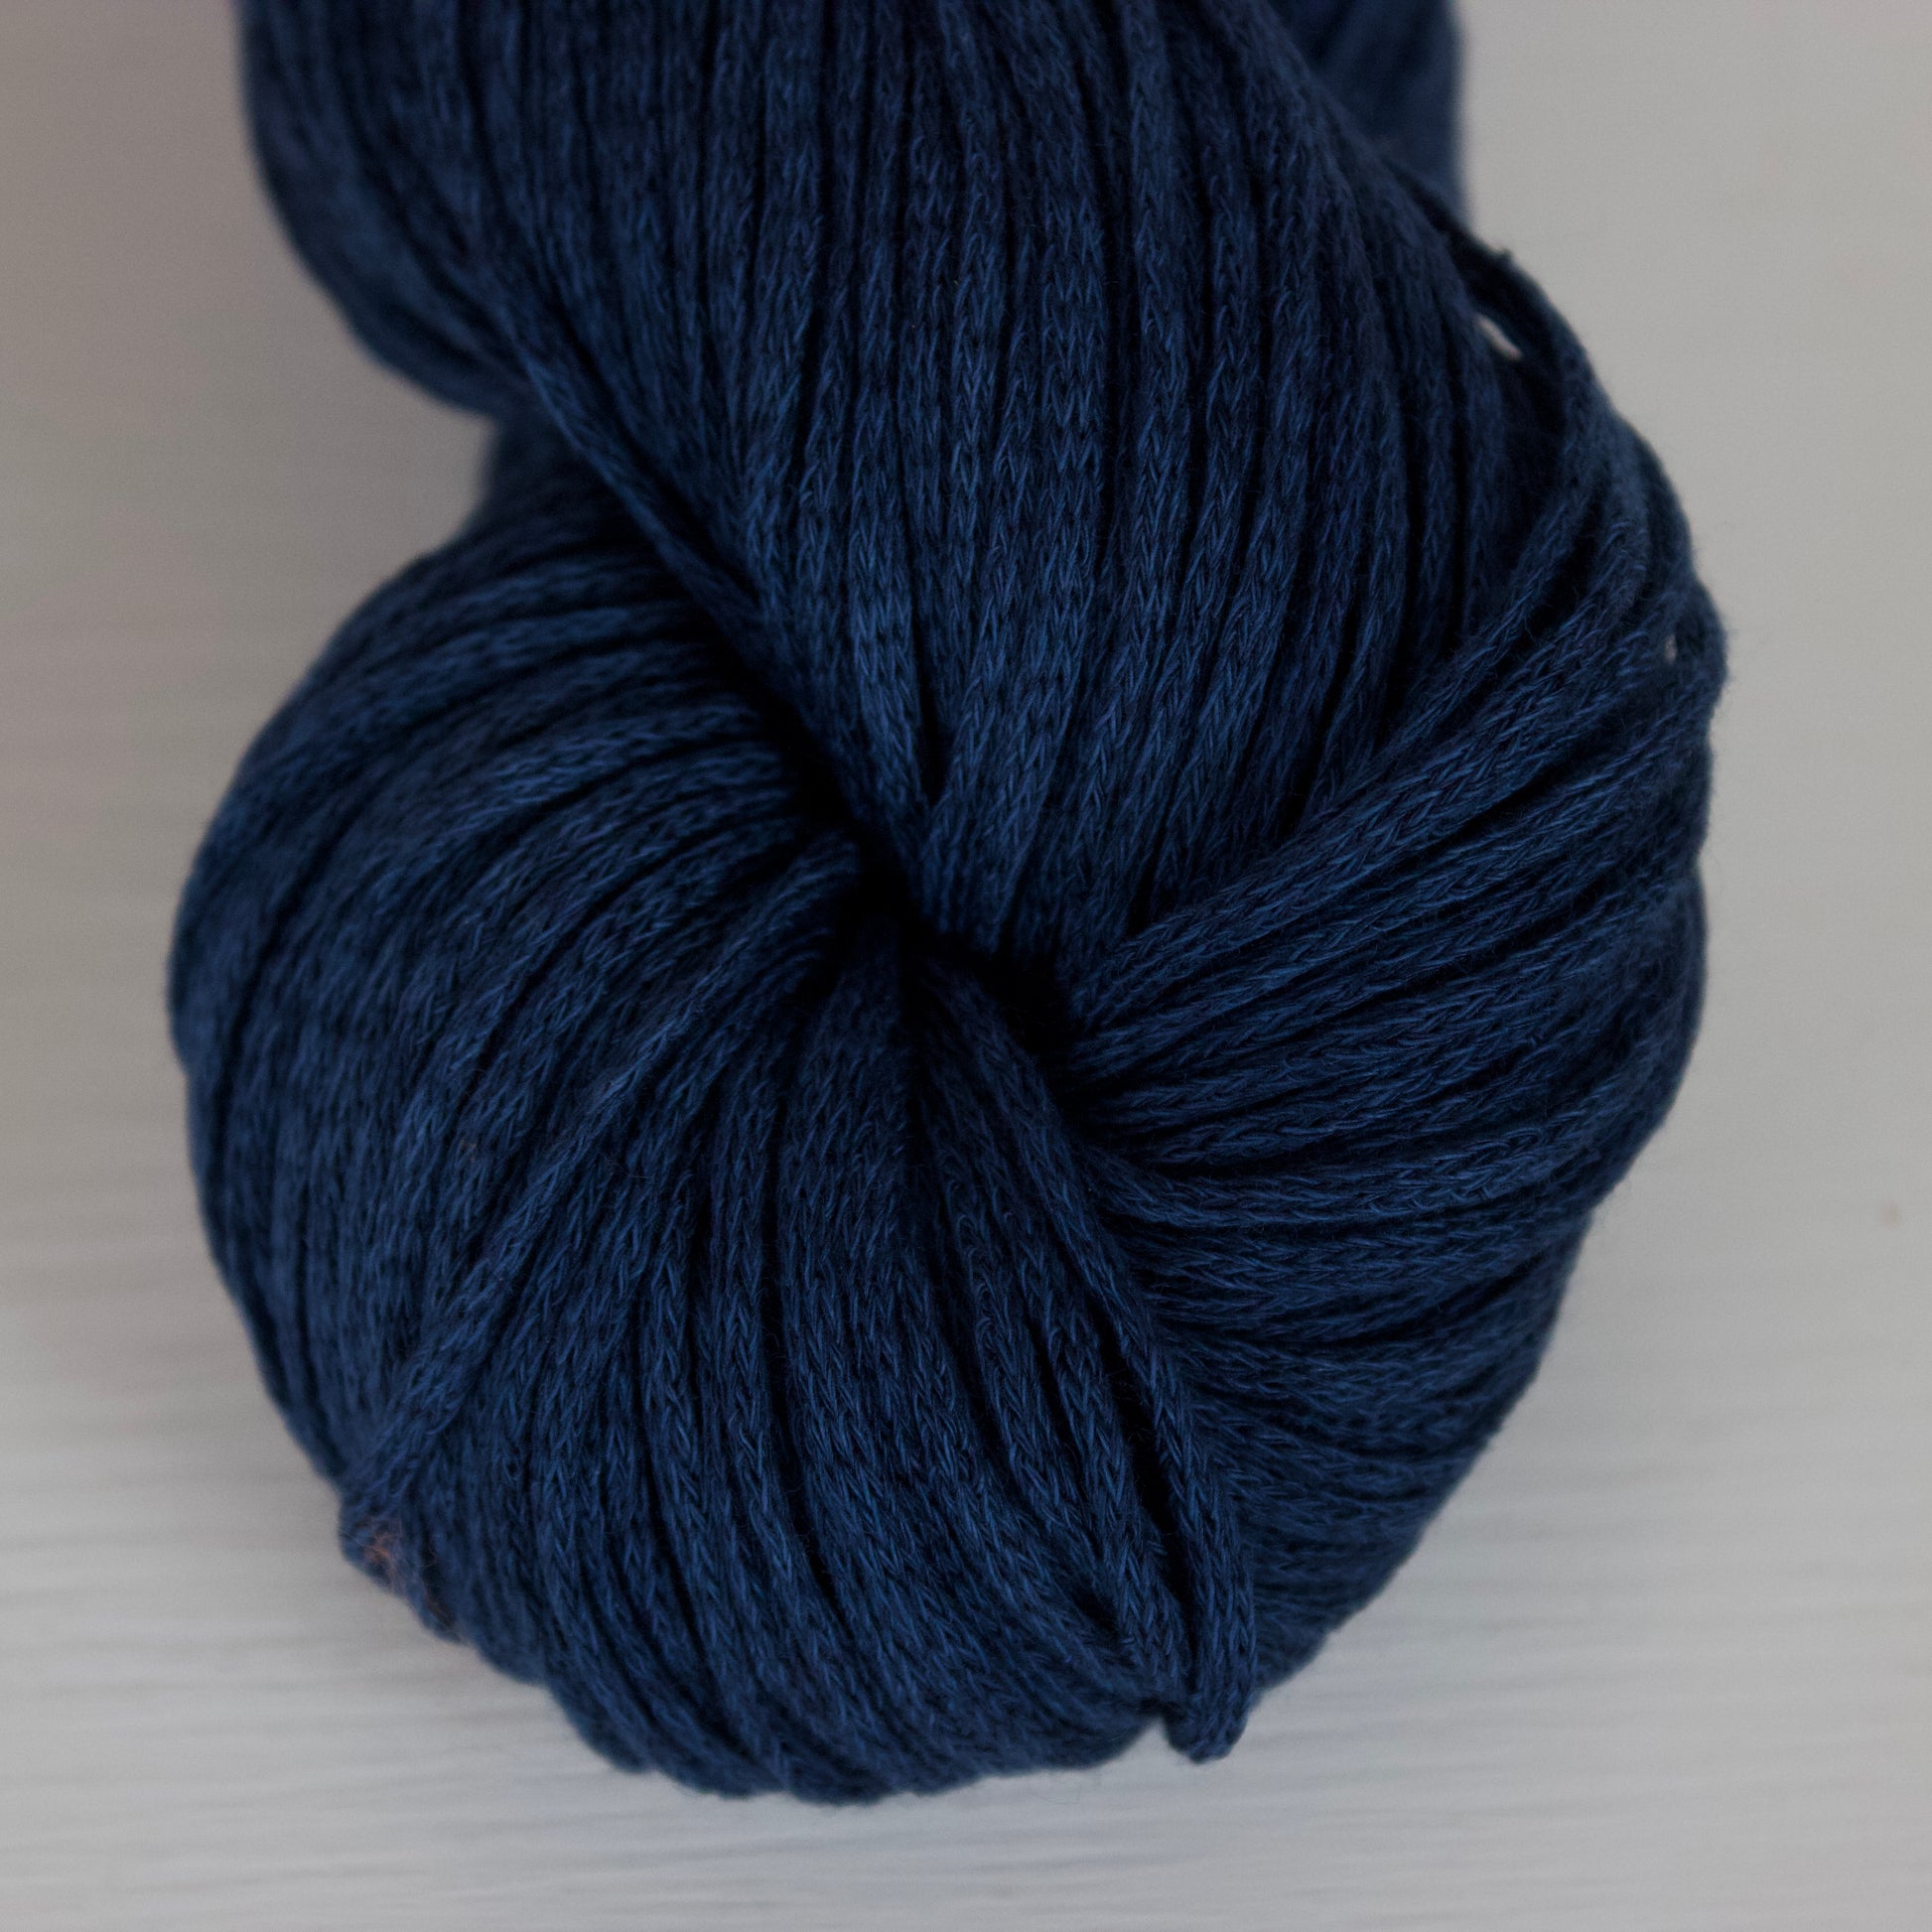 Close up of a skein of rich blue yarn called Cobalt, this is on an aran weight yarn called Taika which is tubular knit and has a semi glossy surface. 